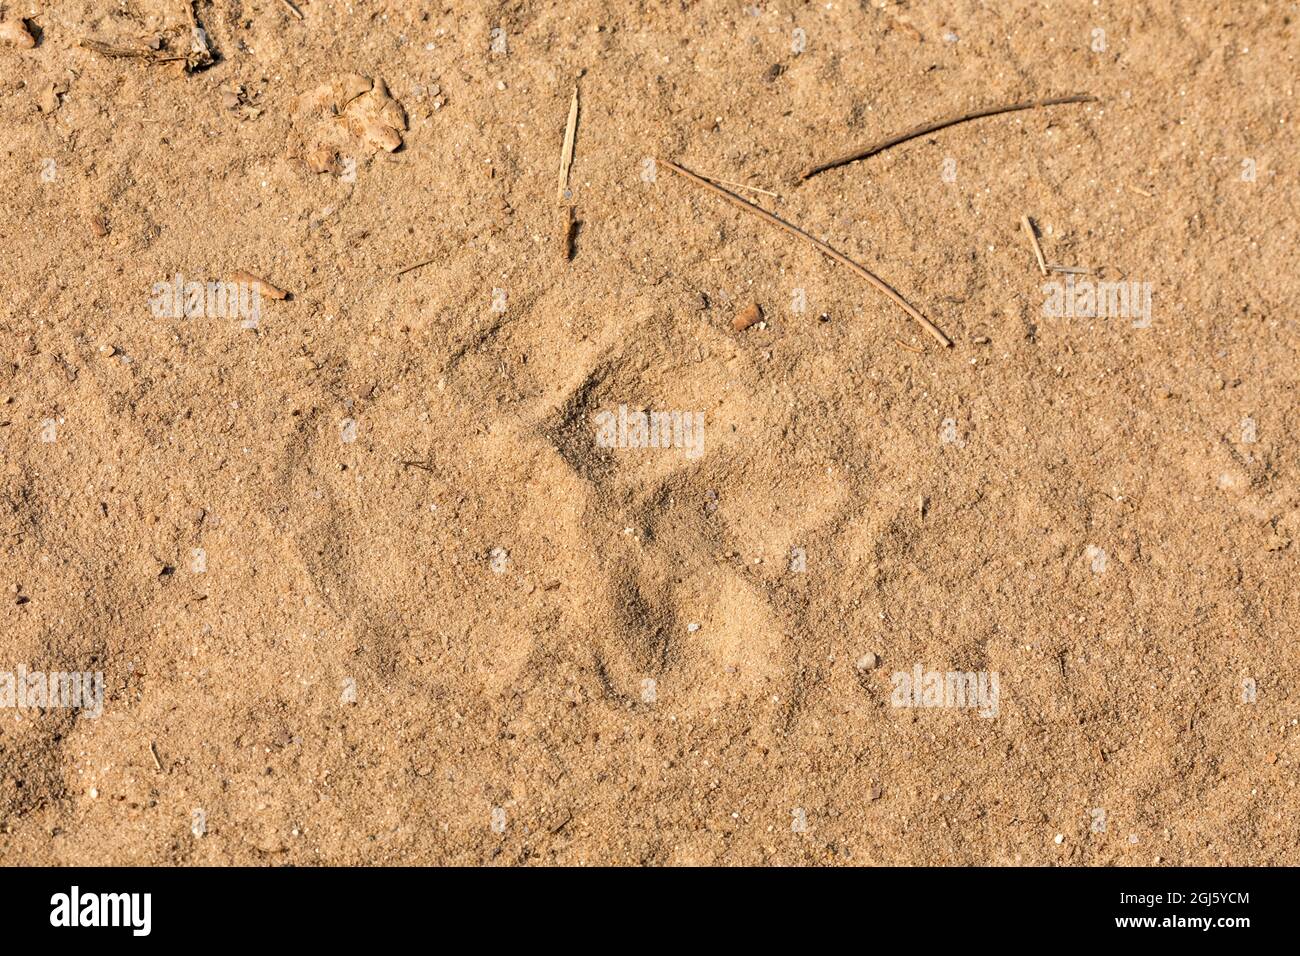 India, Madhya Pradesh, Kanha National Park. Picture of the print of a tiger's paw. Stock Photo